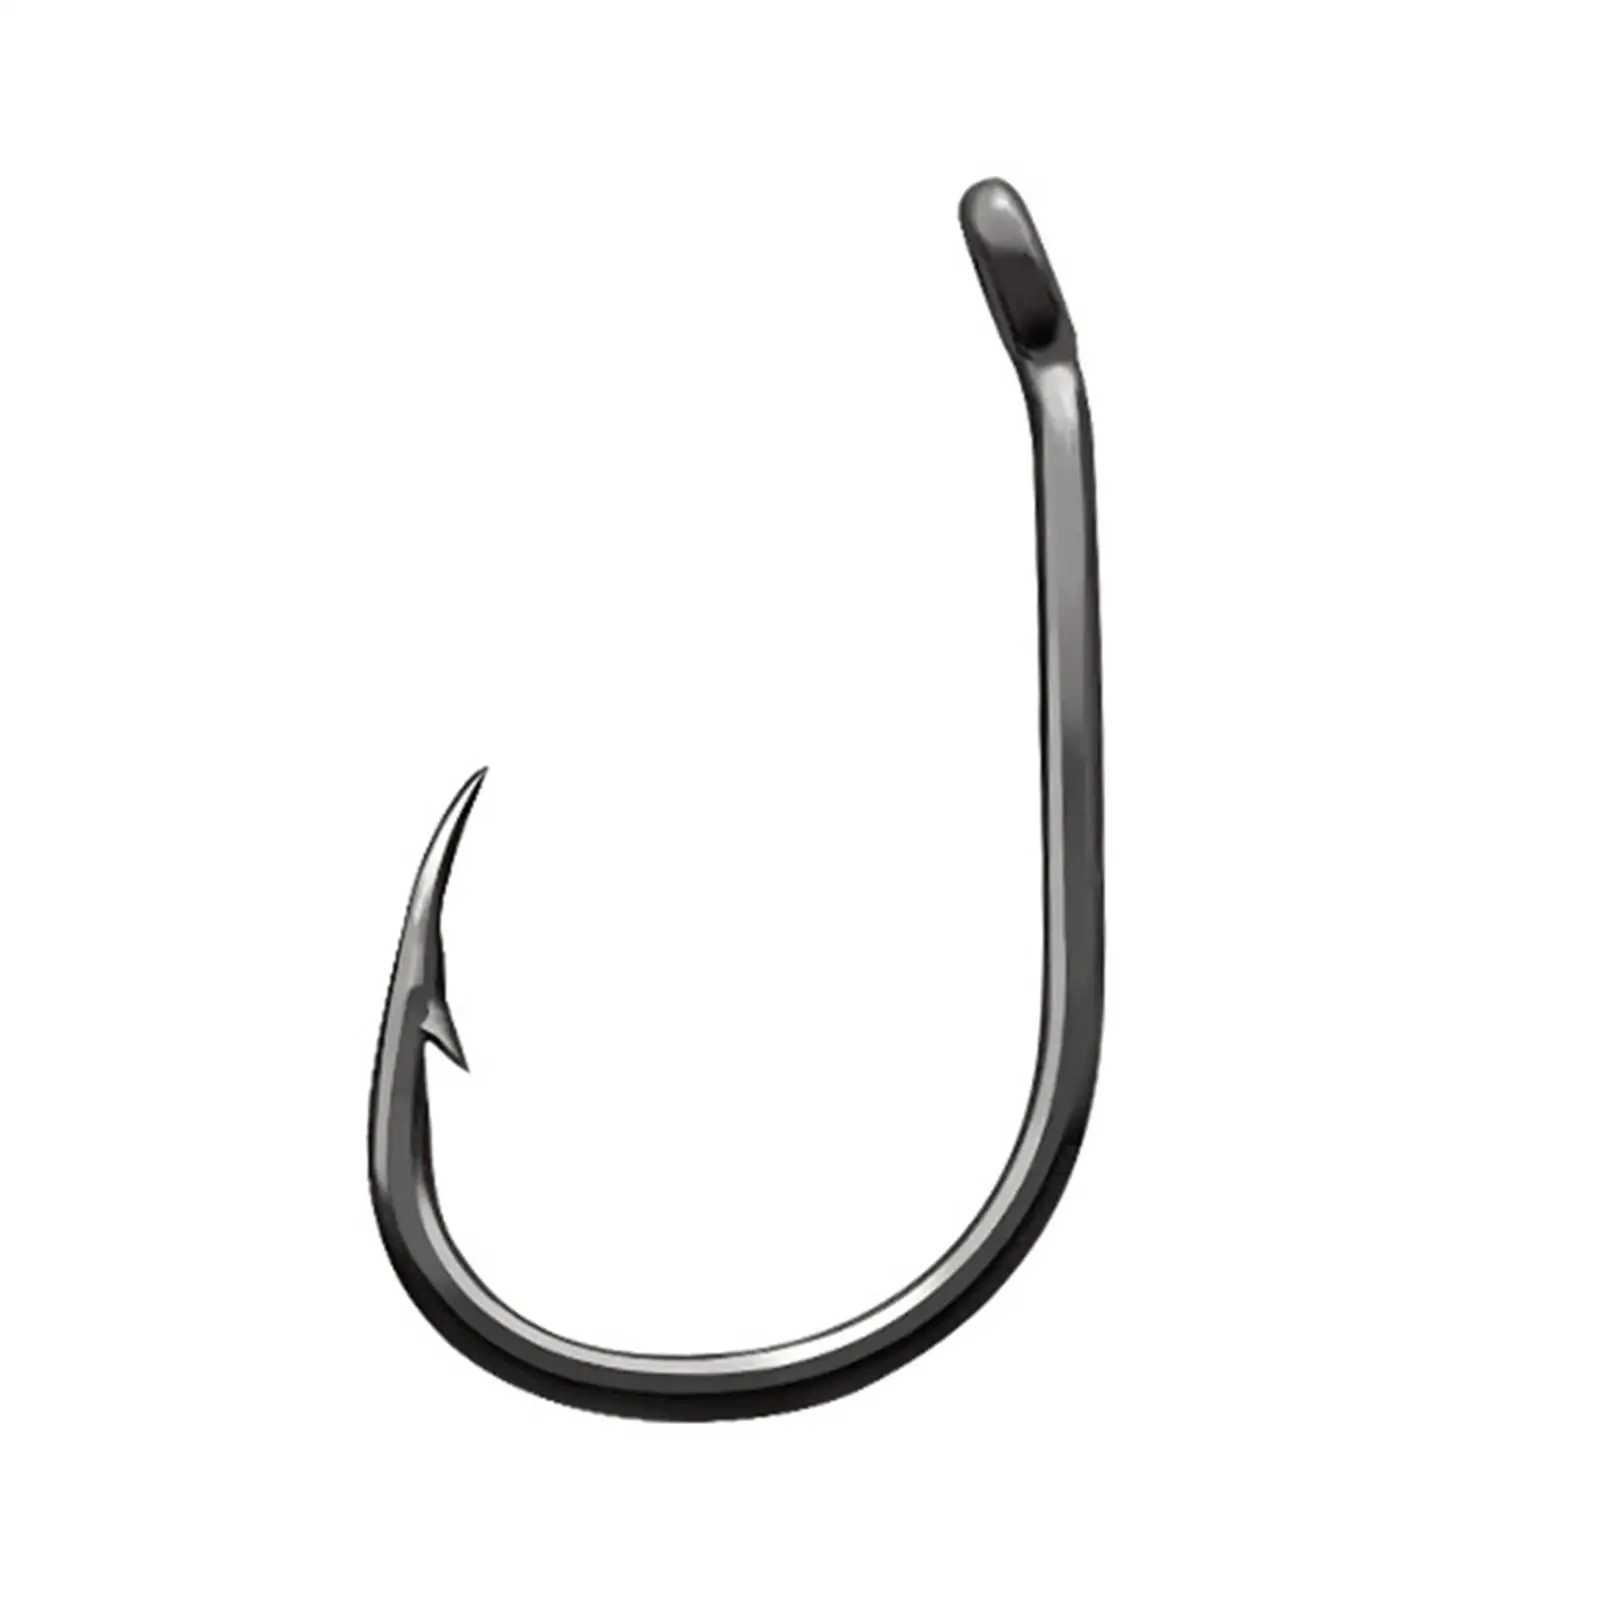 50x Barb Curved Fly Fishing Hooks Versatile Fishing Tackle Accessories Heavy Duty Supplies Fishing Tools Equipment for Dry Flies